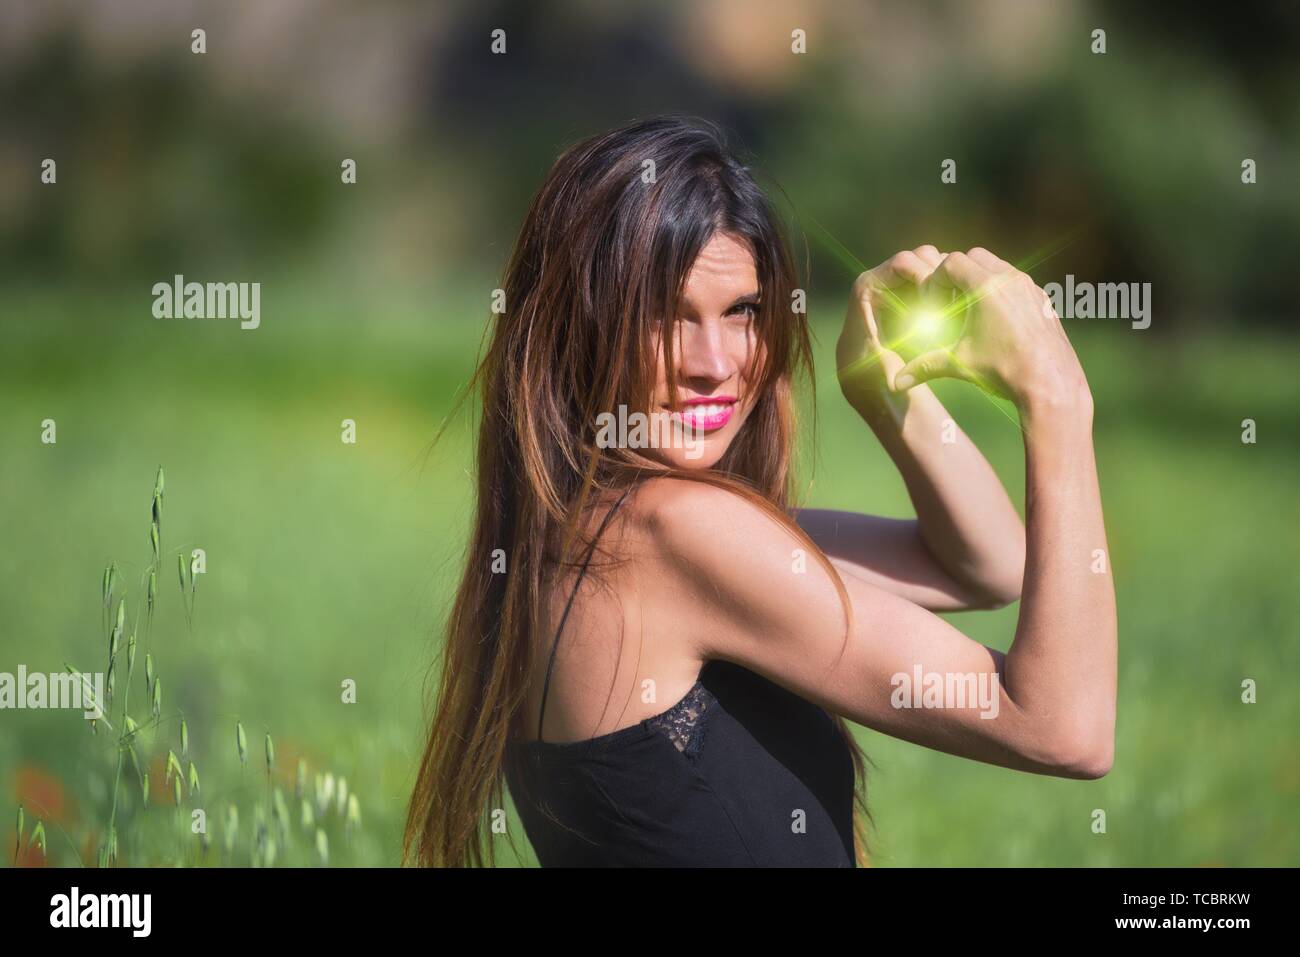 Woman smiling. Heart symbol shaped with green flare inside. Love, nature concept. Ecology and sustainability. Stock Photo